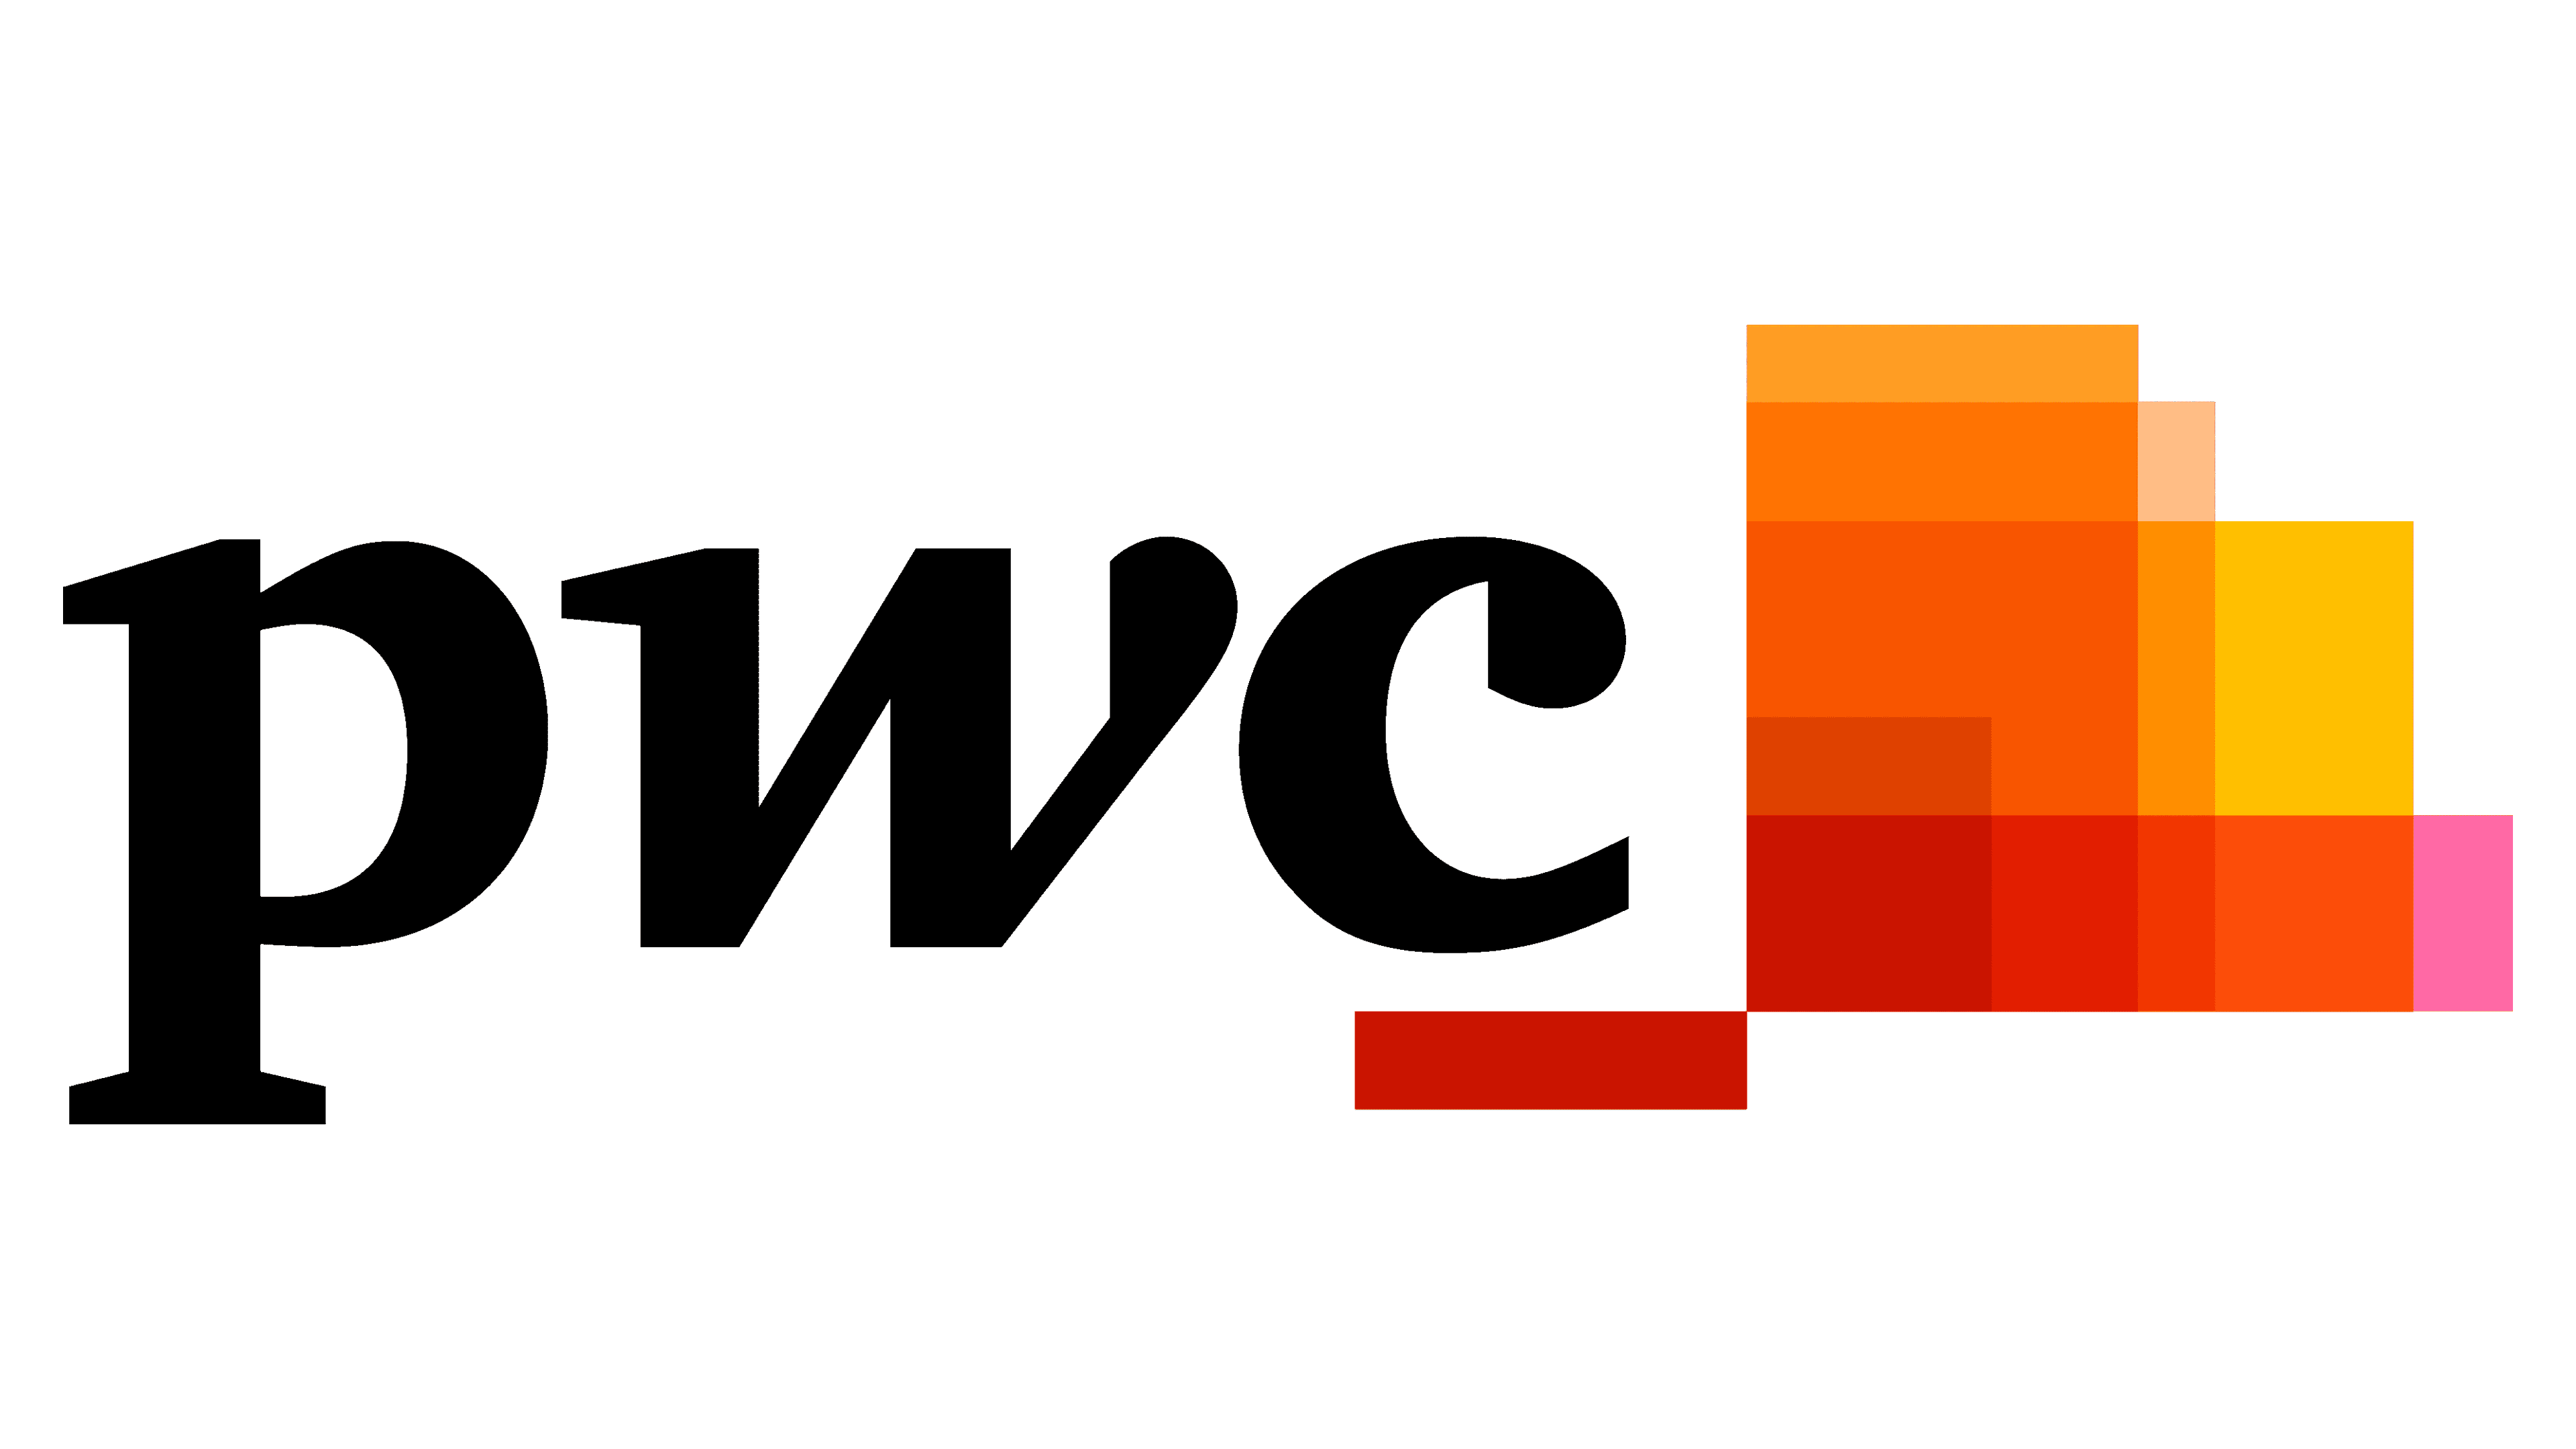 PwC Logo and symbol, meaning, history, sign.